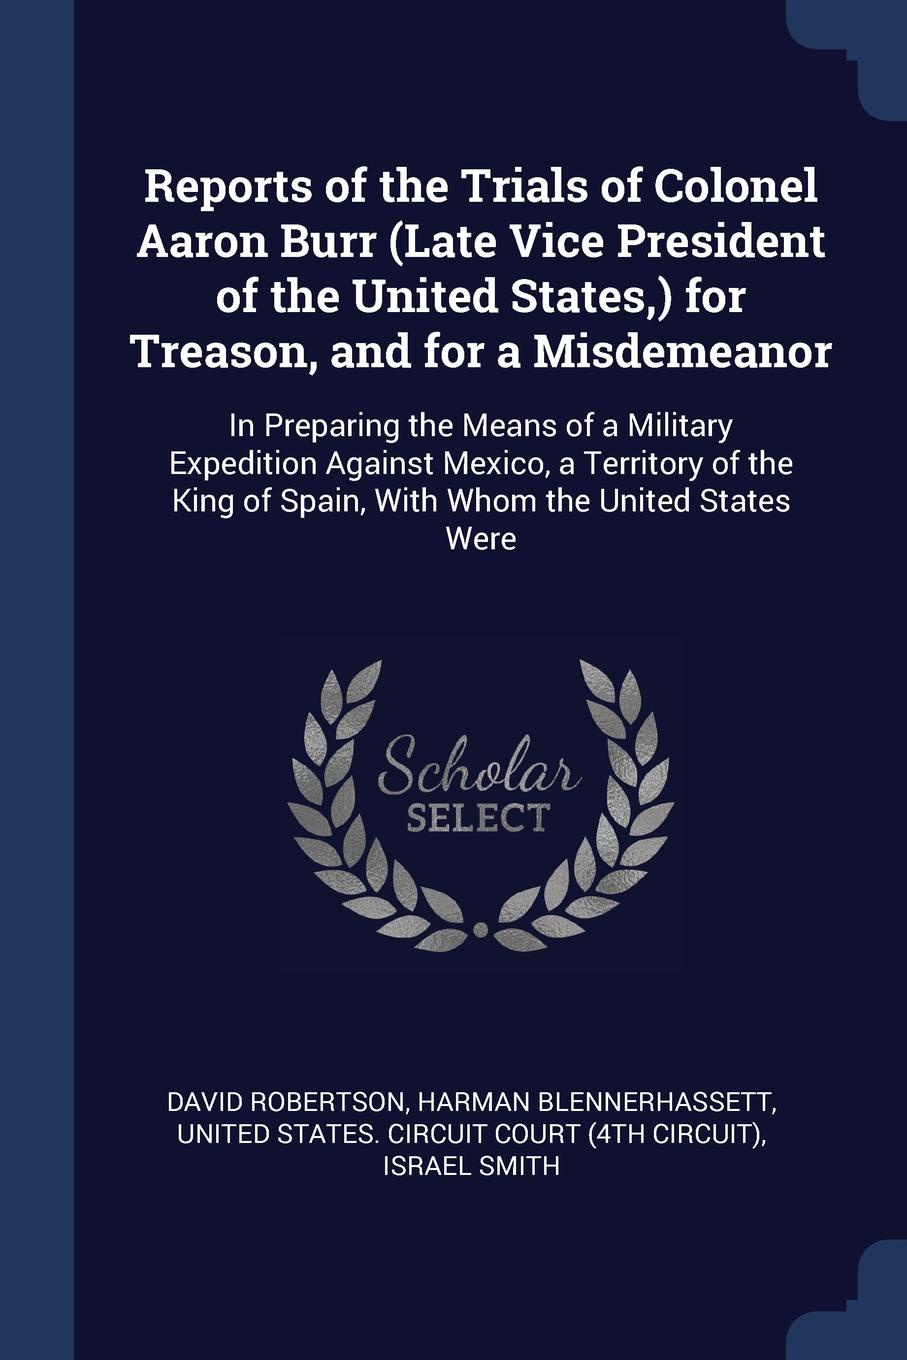 Reports of the Trials of Colonel Aaron Burr (Late Vice President of the United States,) for Treason, and for a Misdemeanor. In Preparing the Means of a Military Expedition Against Mexico, a Territory of the King of Spain, With Whom the United Stat...